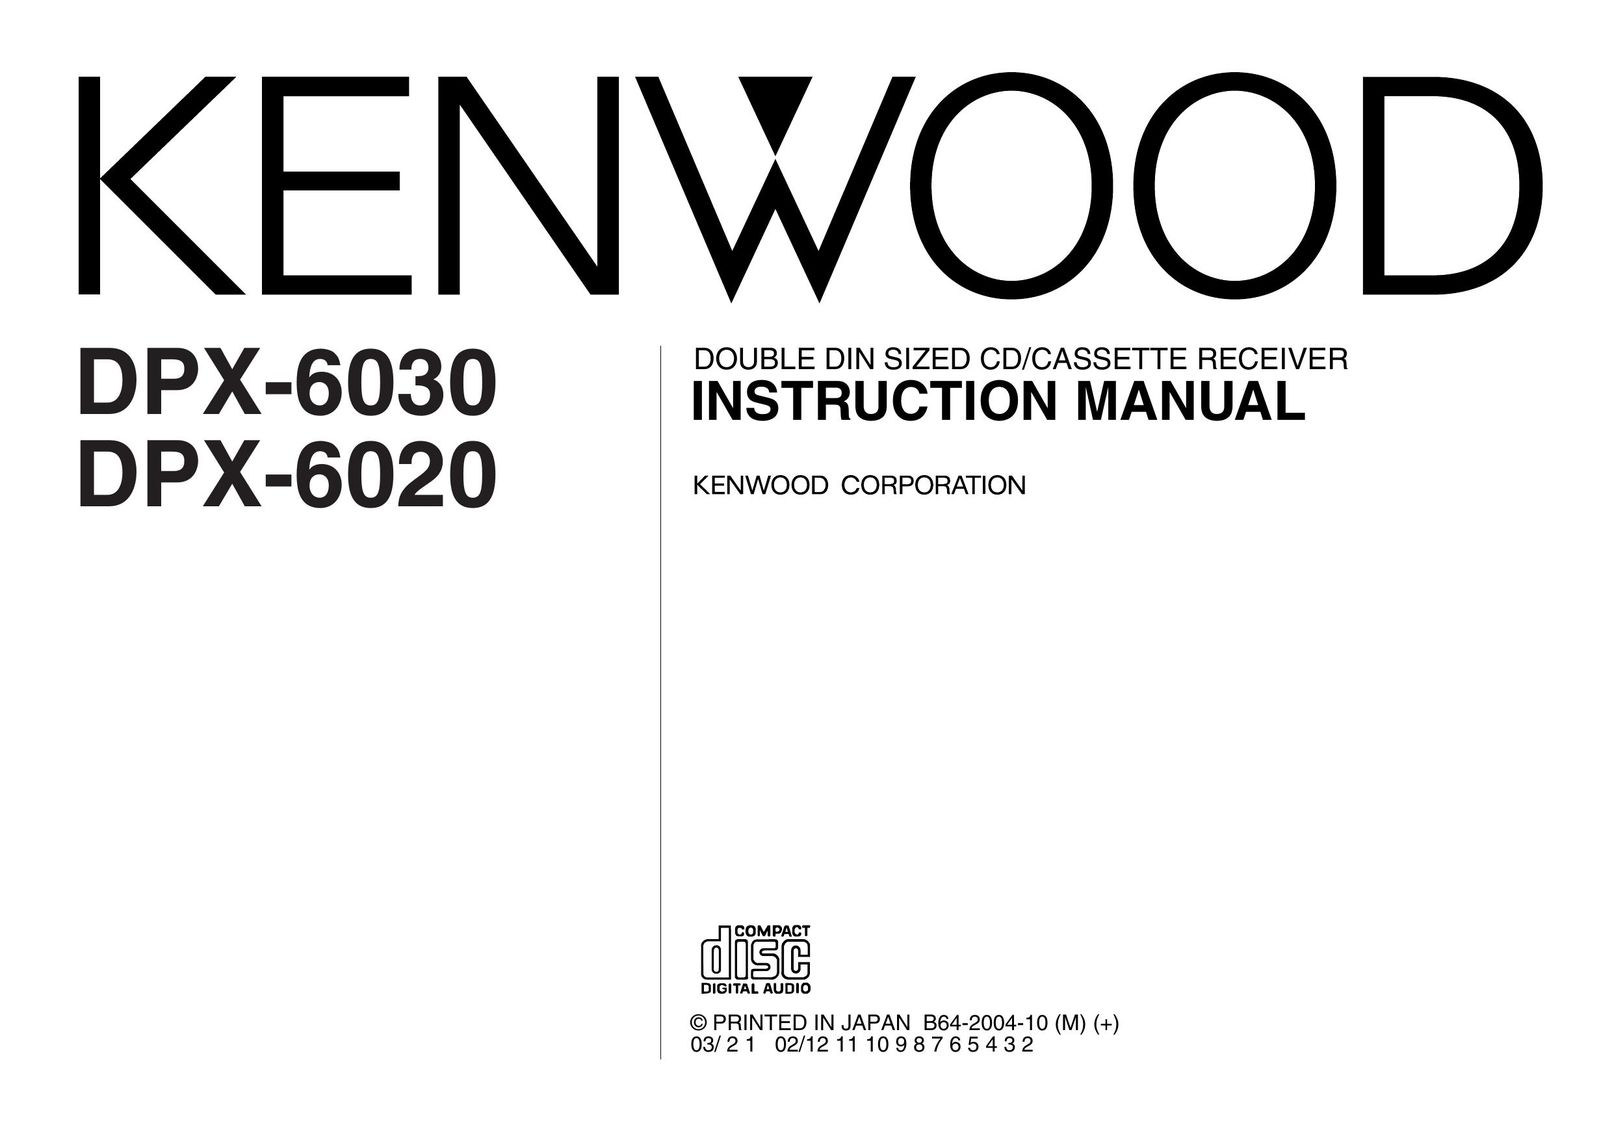 Kenwood DPX-6030 Car Stereo System User Manual